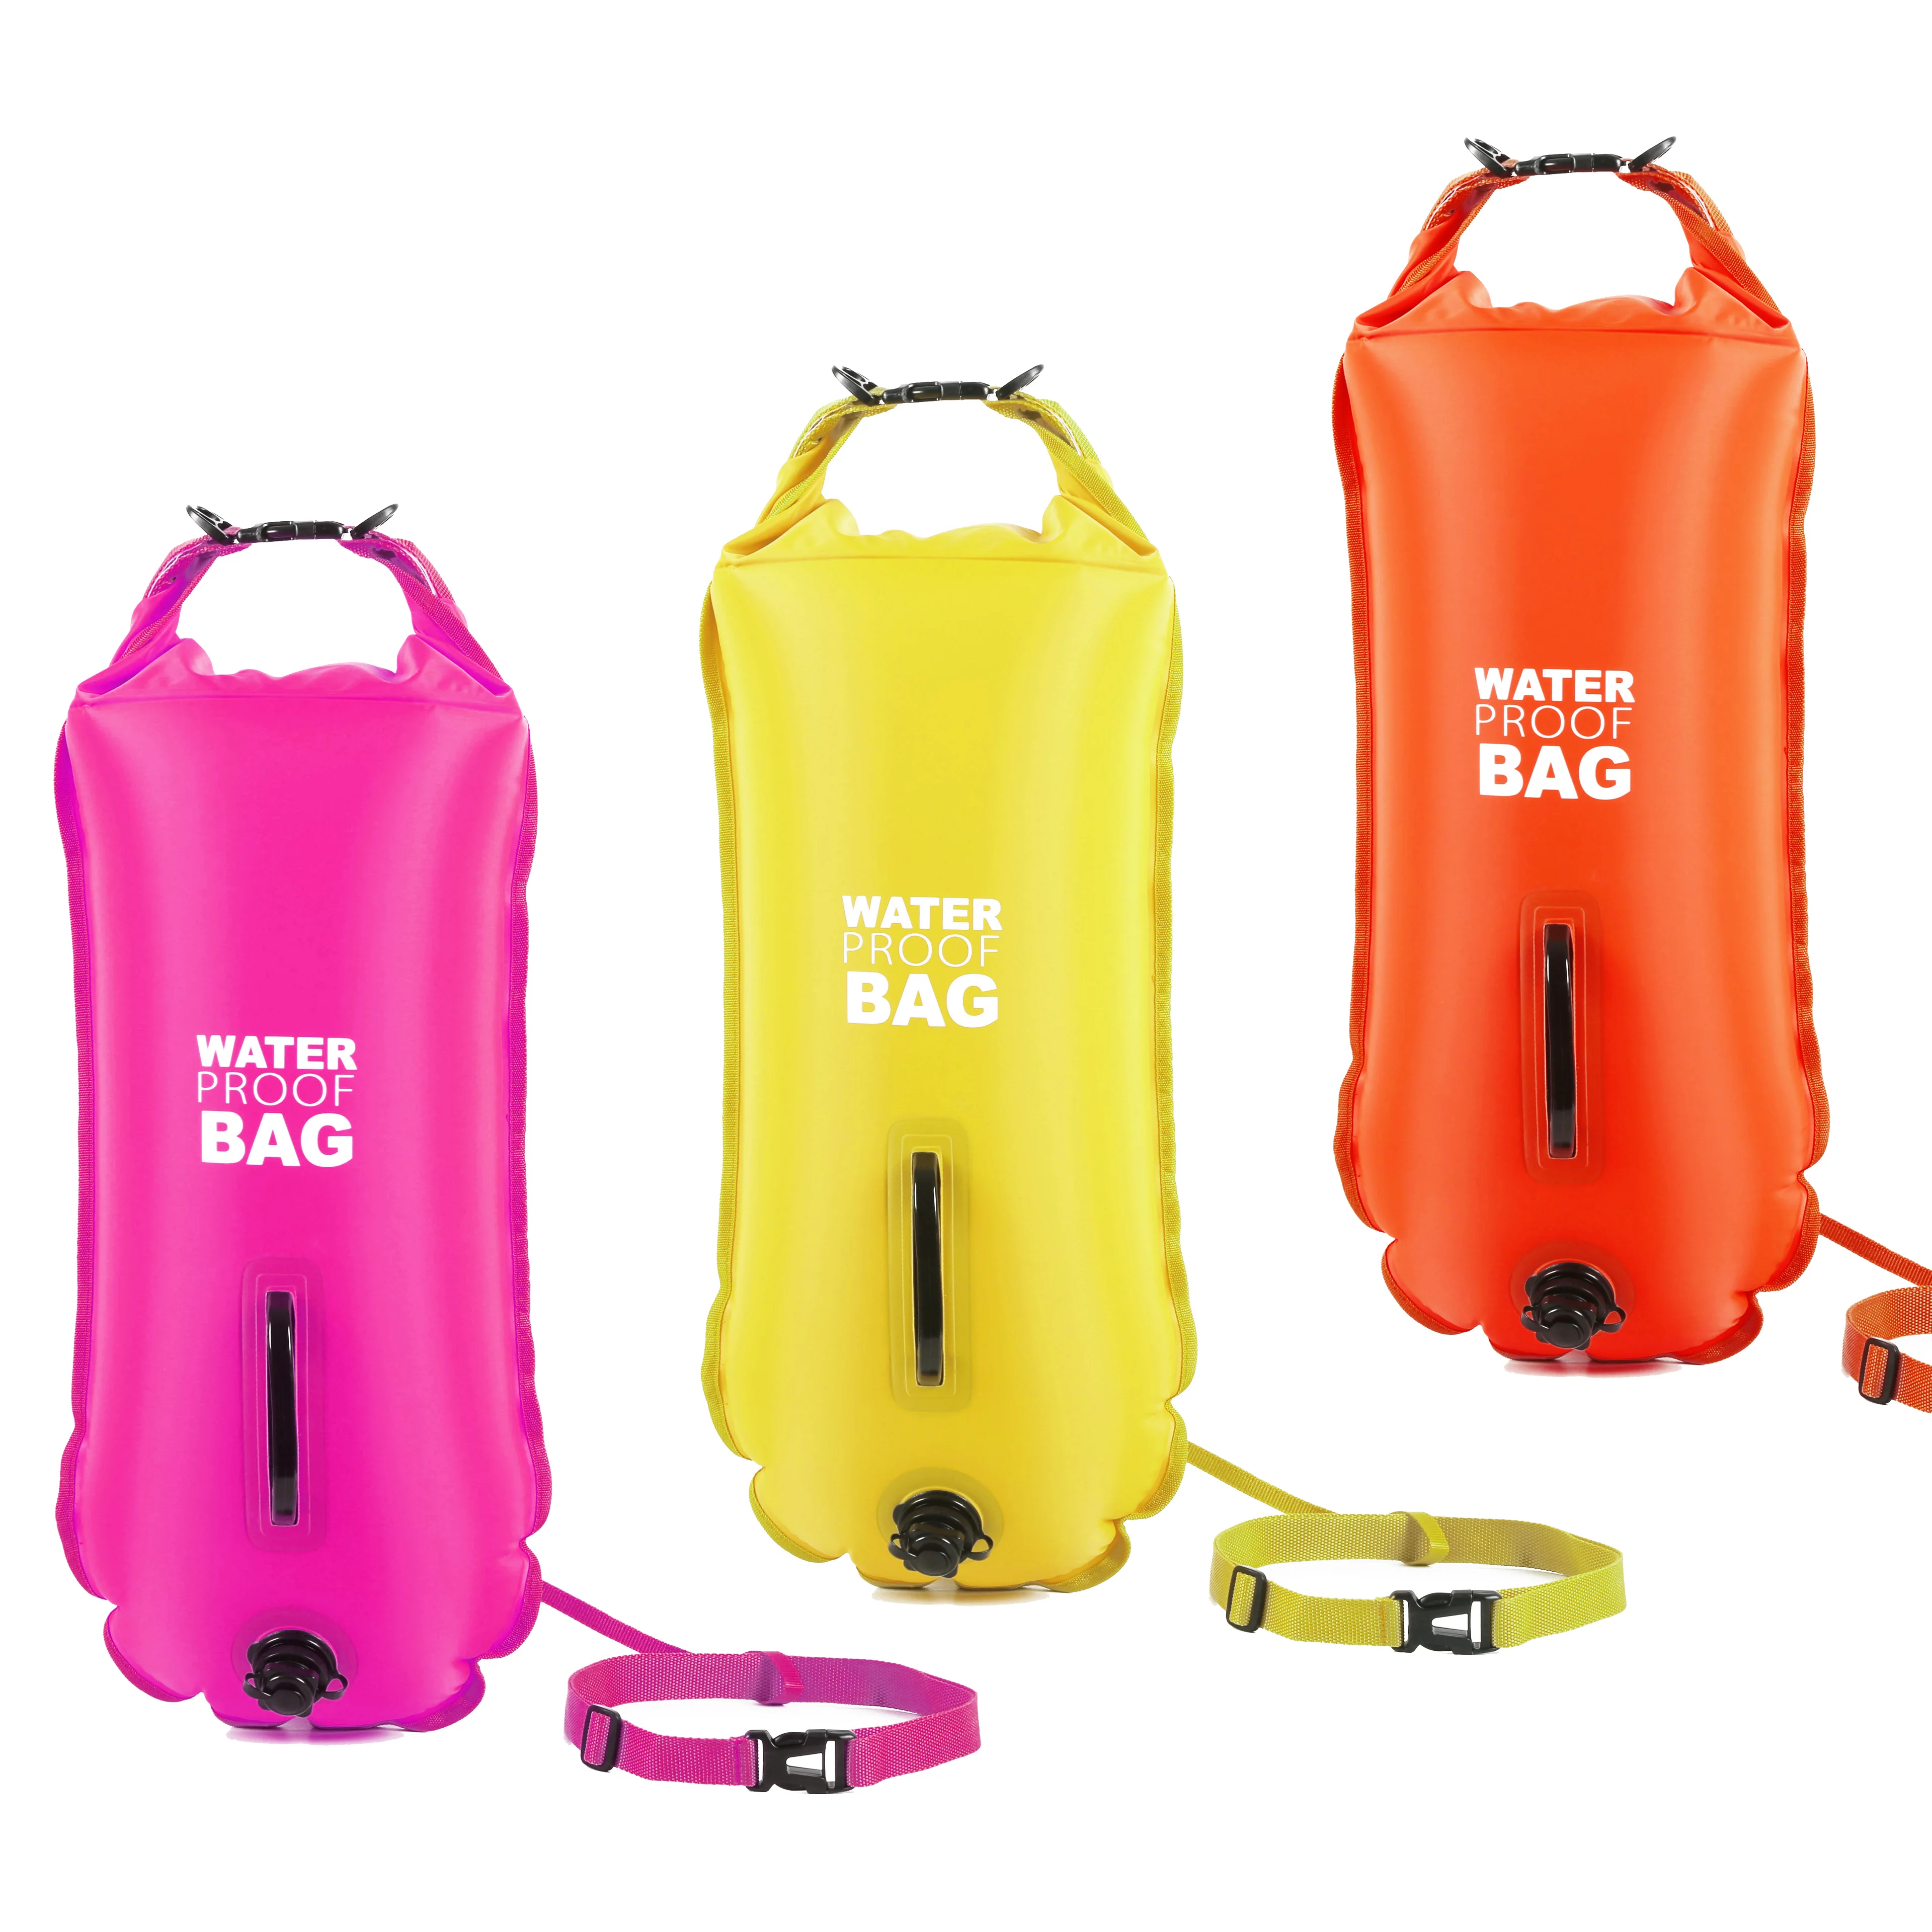 

Nylon Swim Buoy Inflatable Floating for Open Water tow floating Swim Buoy Bag Factory, Yellow orange pink